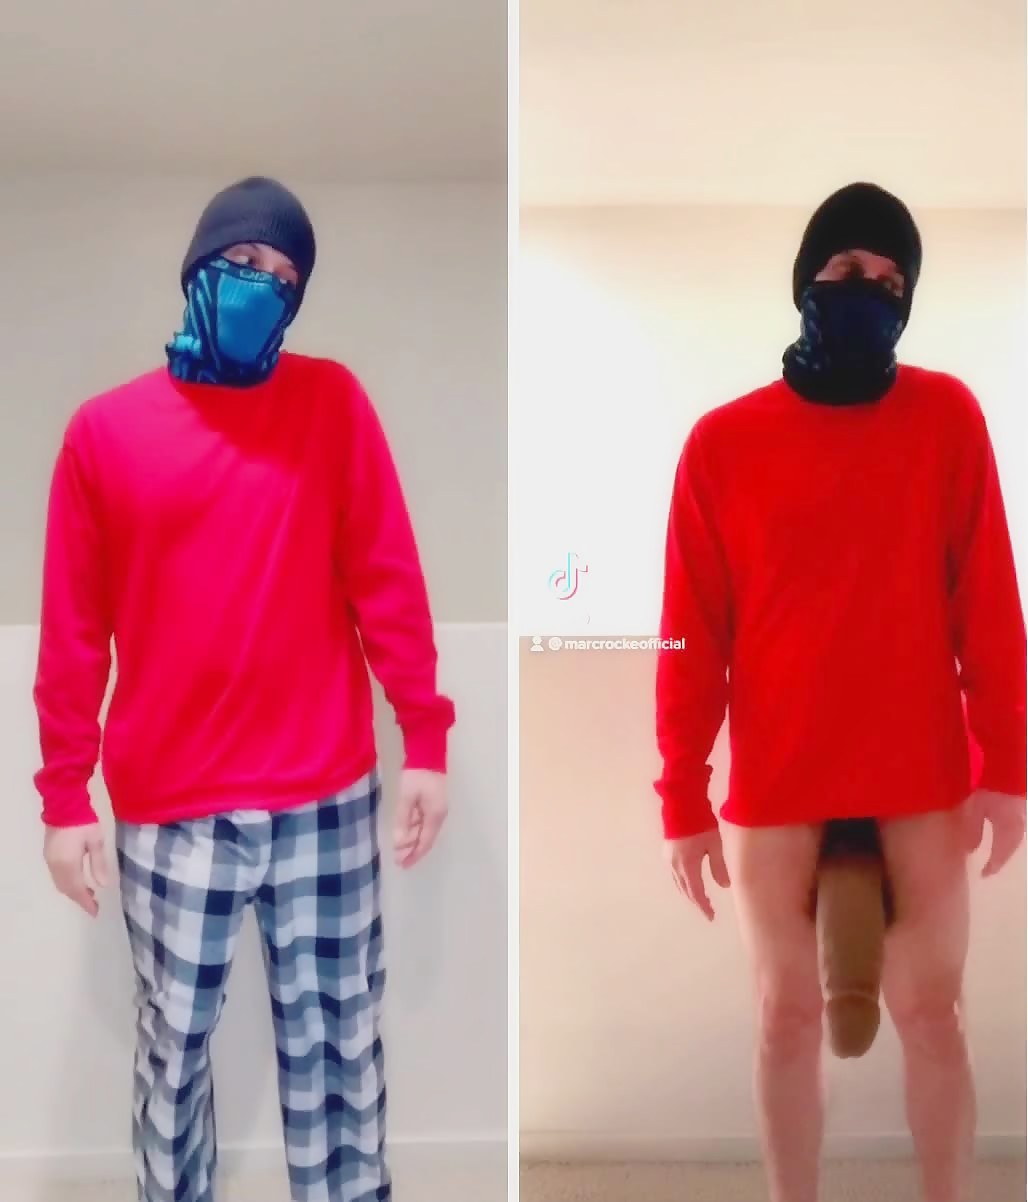 TikTok Side-by-Side - When People Say I Made my Dick Too Big